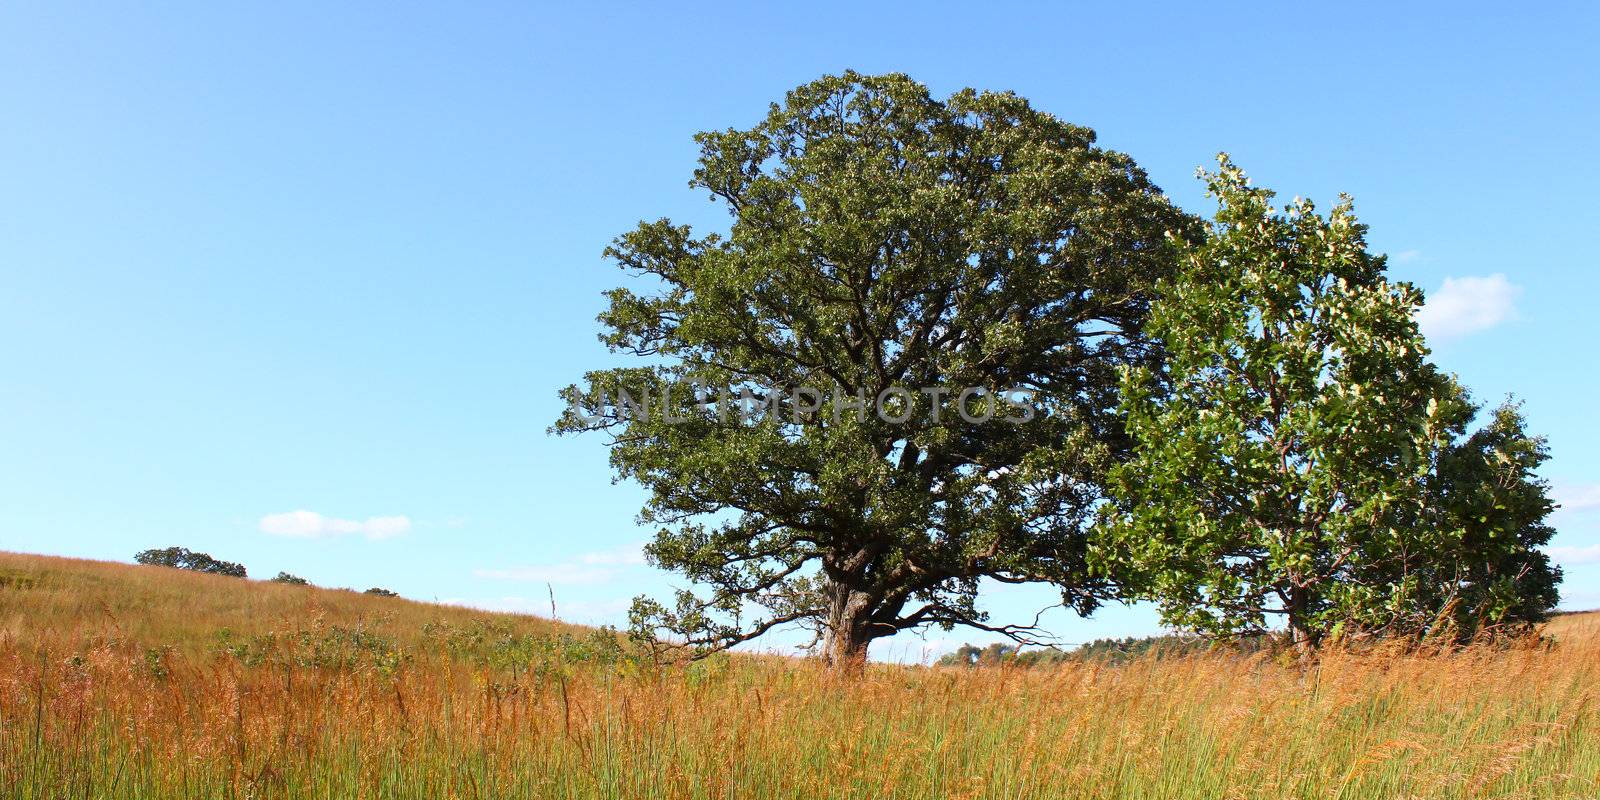 A giant old oak tree in the prairie at Nachusa Grasslands of northern Illinois.